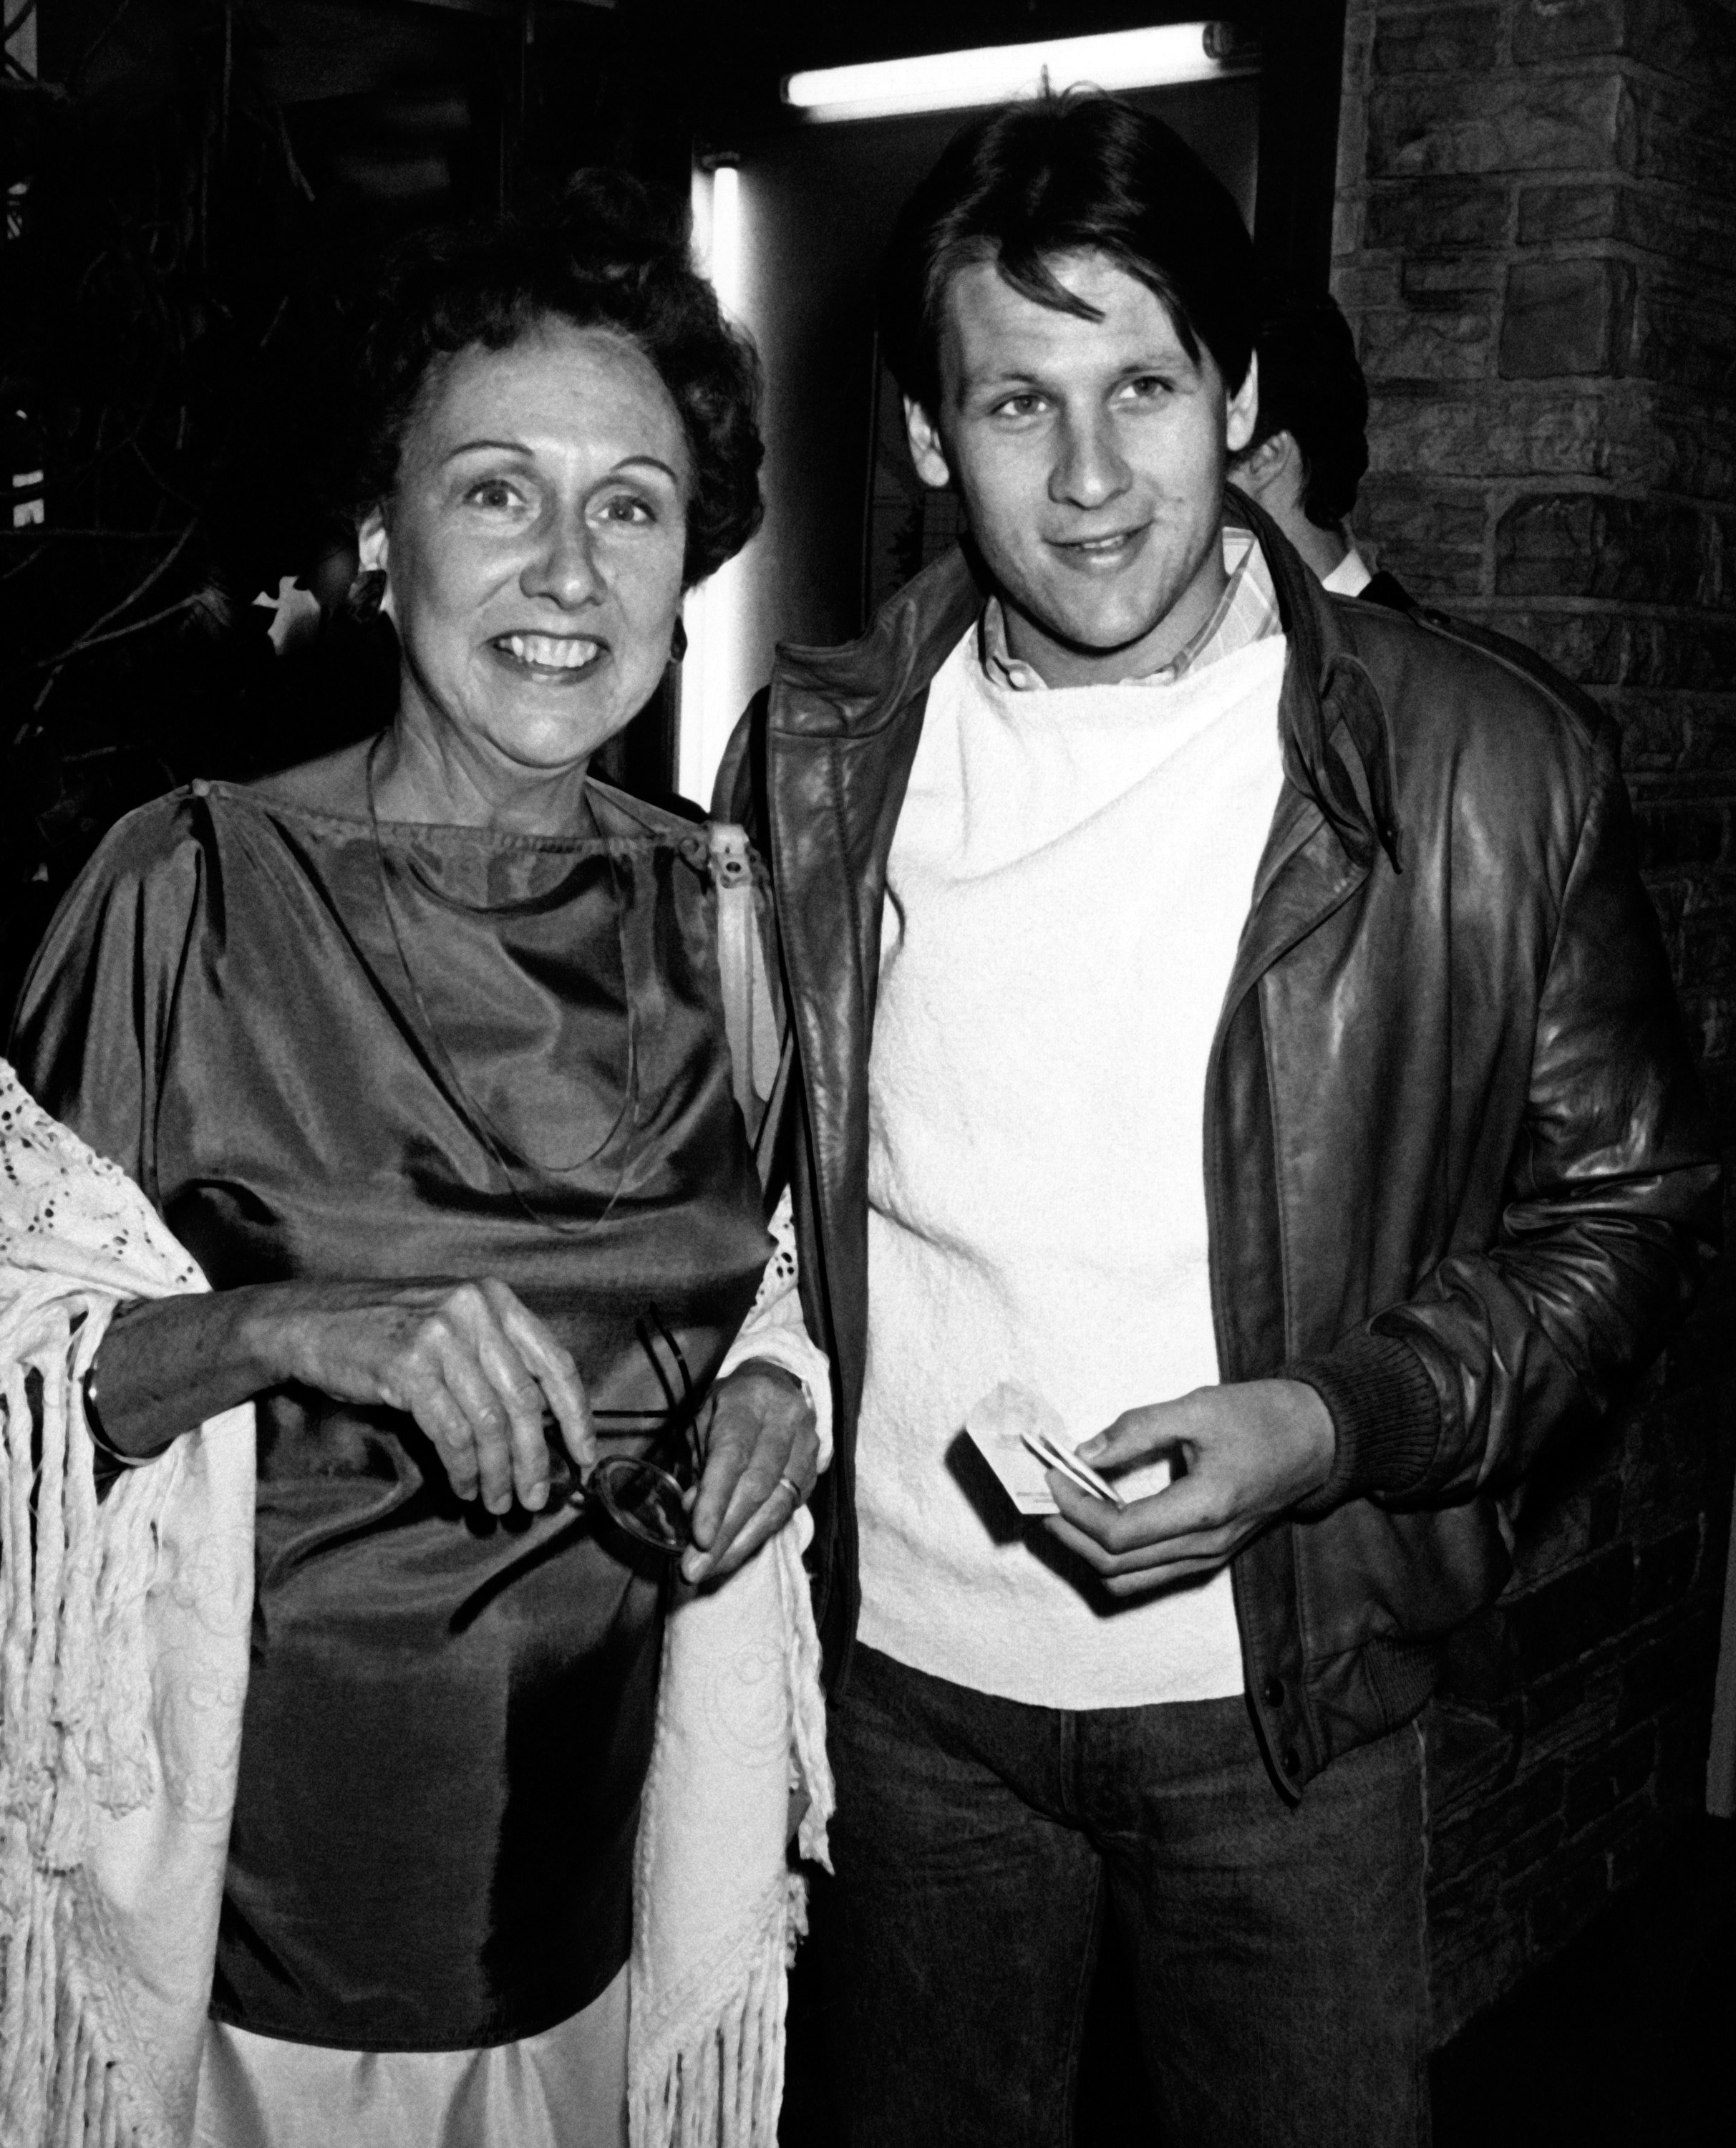 Jean Stapleton and son John Putch at the premiere of "Cloud Nine" on May 8, 1983 in Los Angeles, California. | Photo: Getty Images